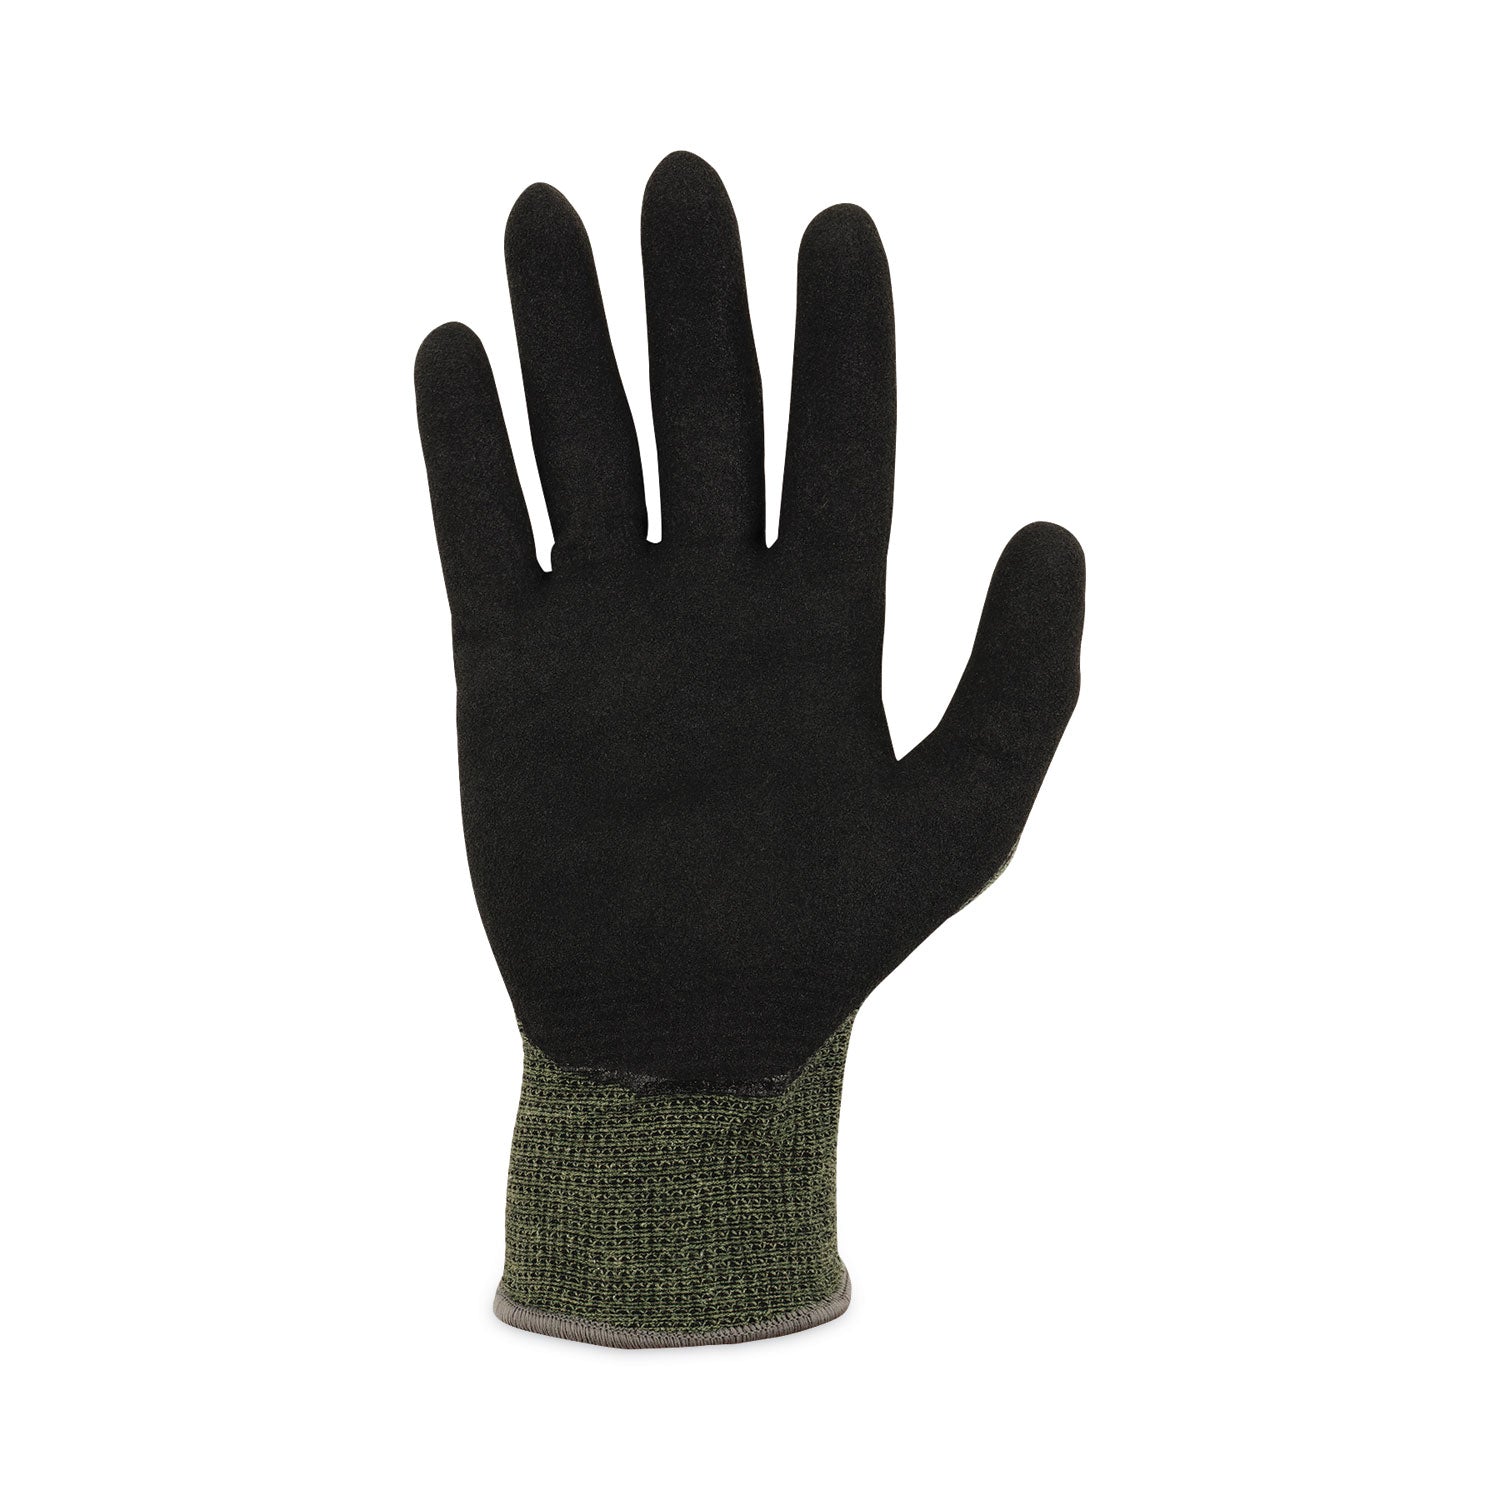 proflex-7042-ansi-a4-nitrile-coated-cr-gloves-green-medium-pair-ships-in-1-3-business-days_ego10343 - 5